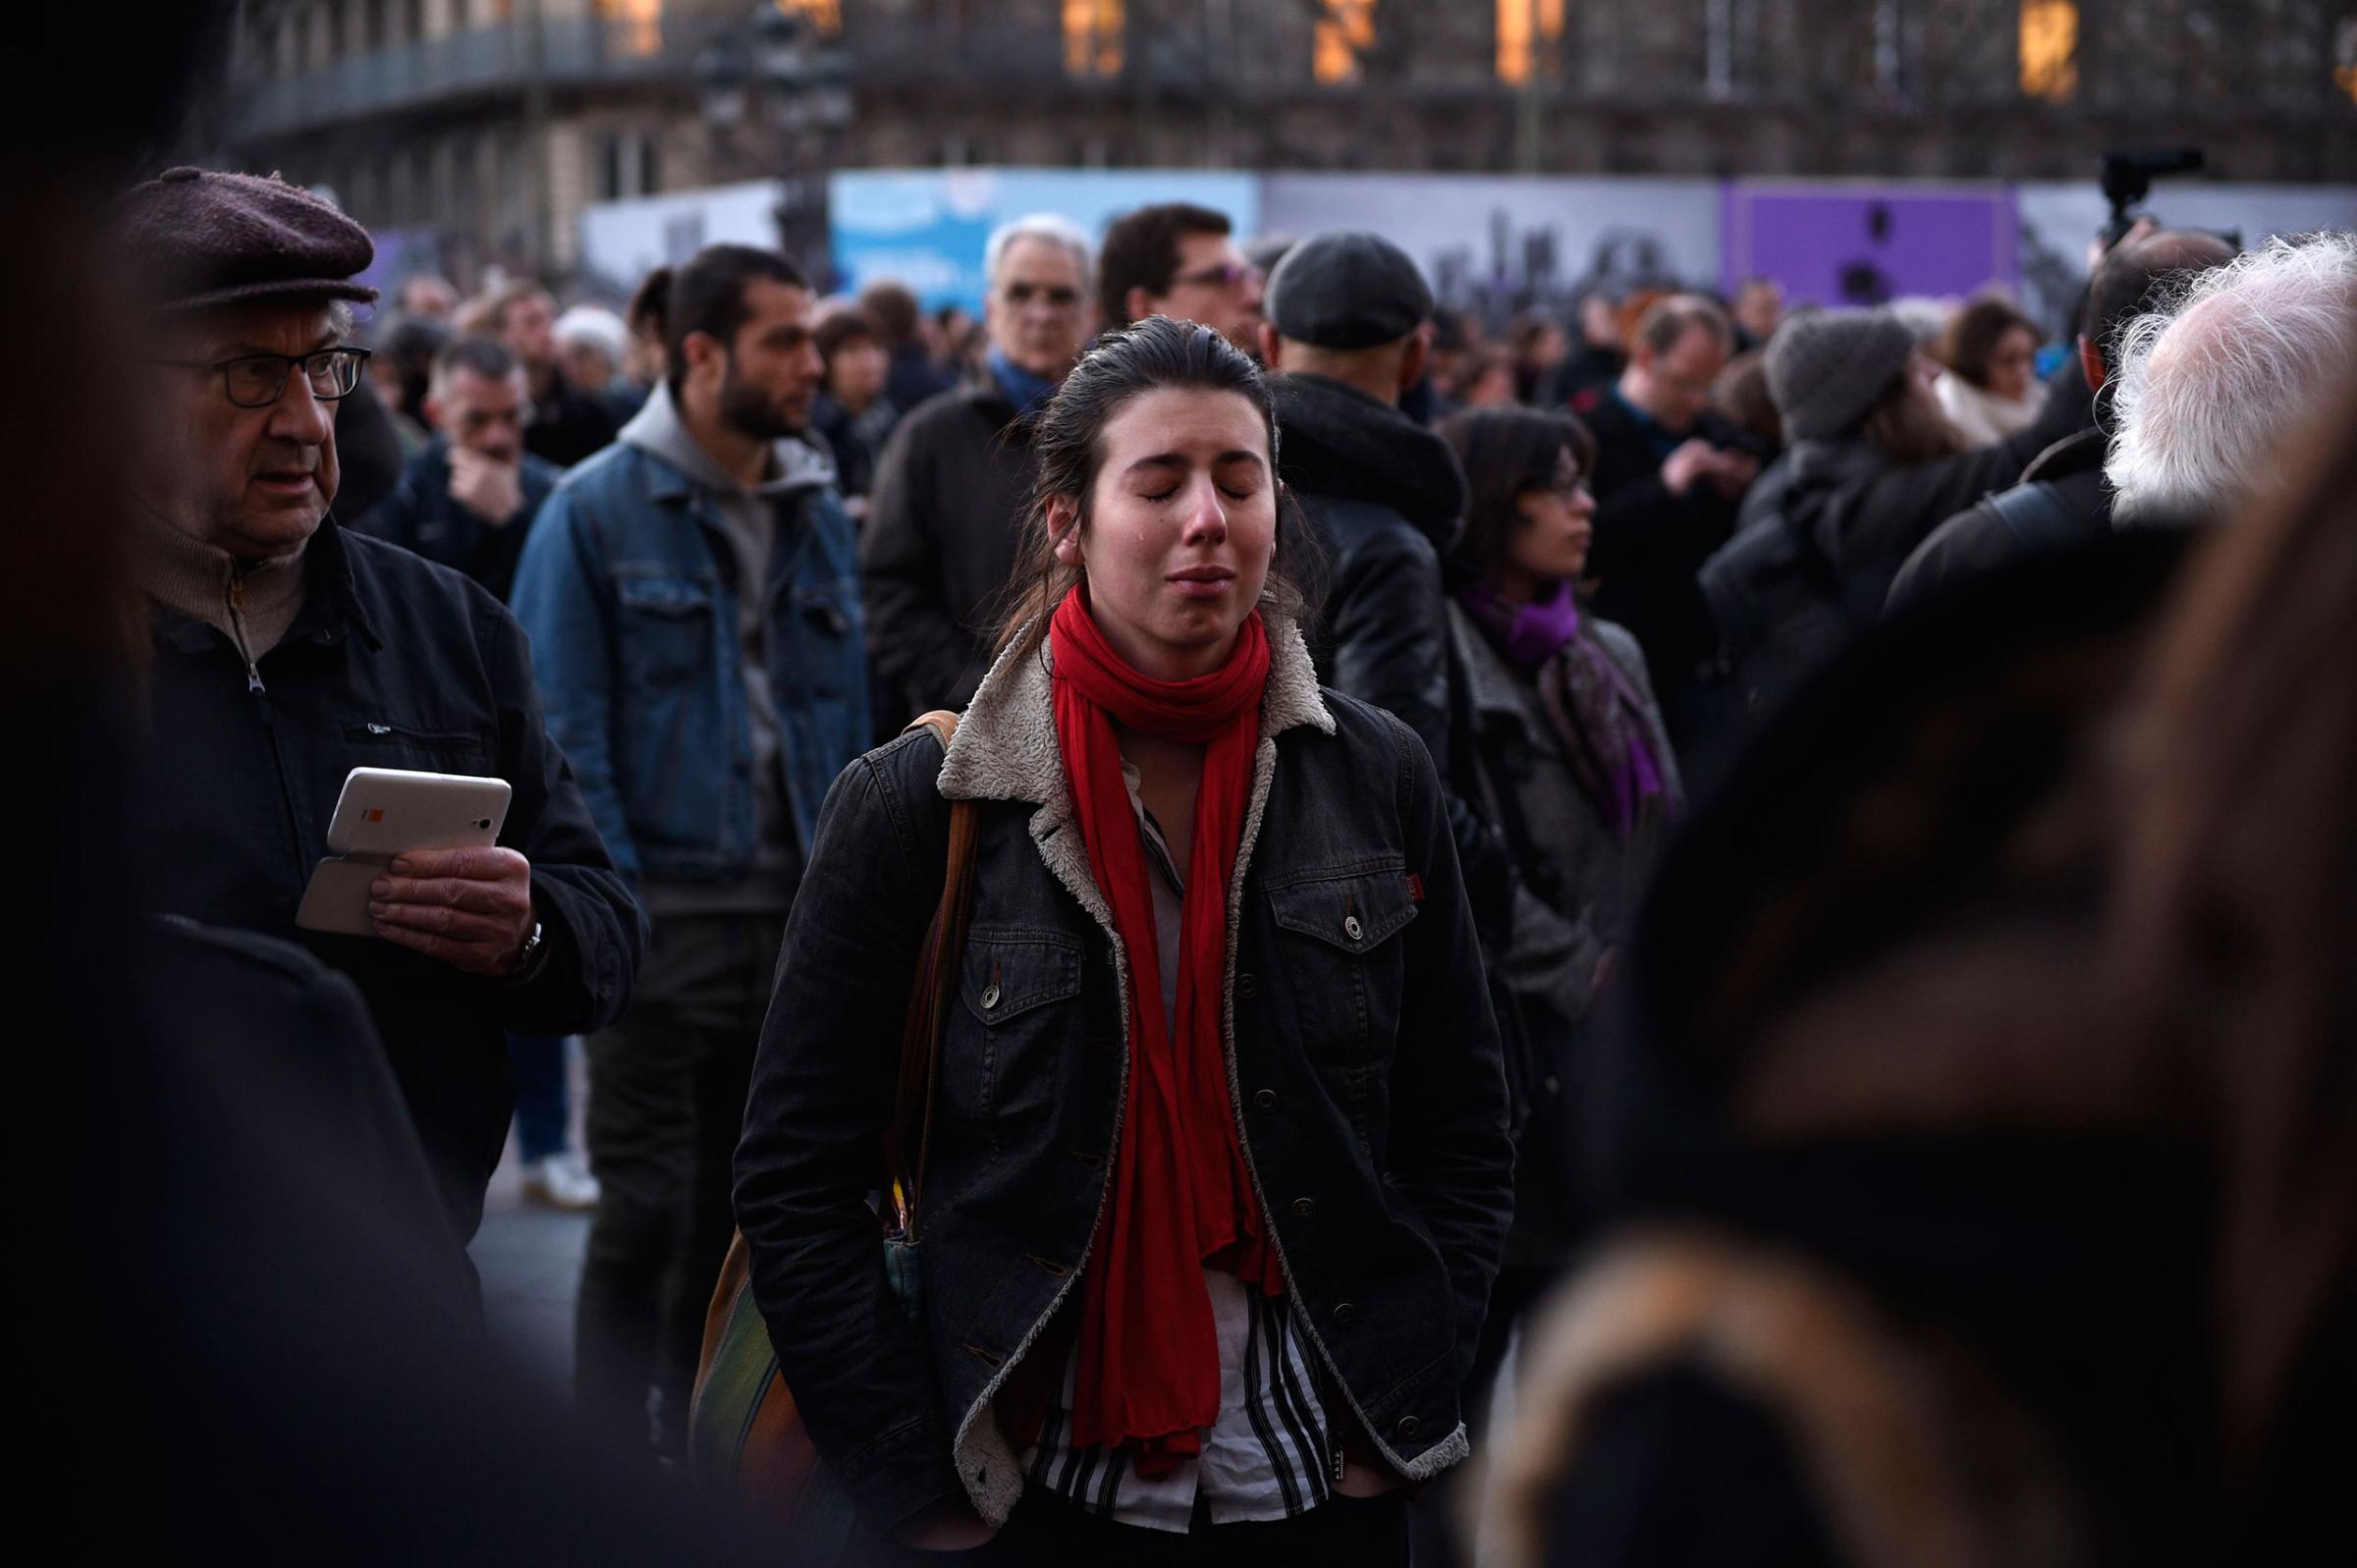 A woman mourning the victims of the Brussels terrorist attacks cries in front of the the city hall of Paris where people gather as a tribute, March 22, 2016.